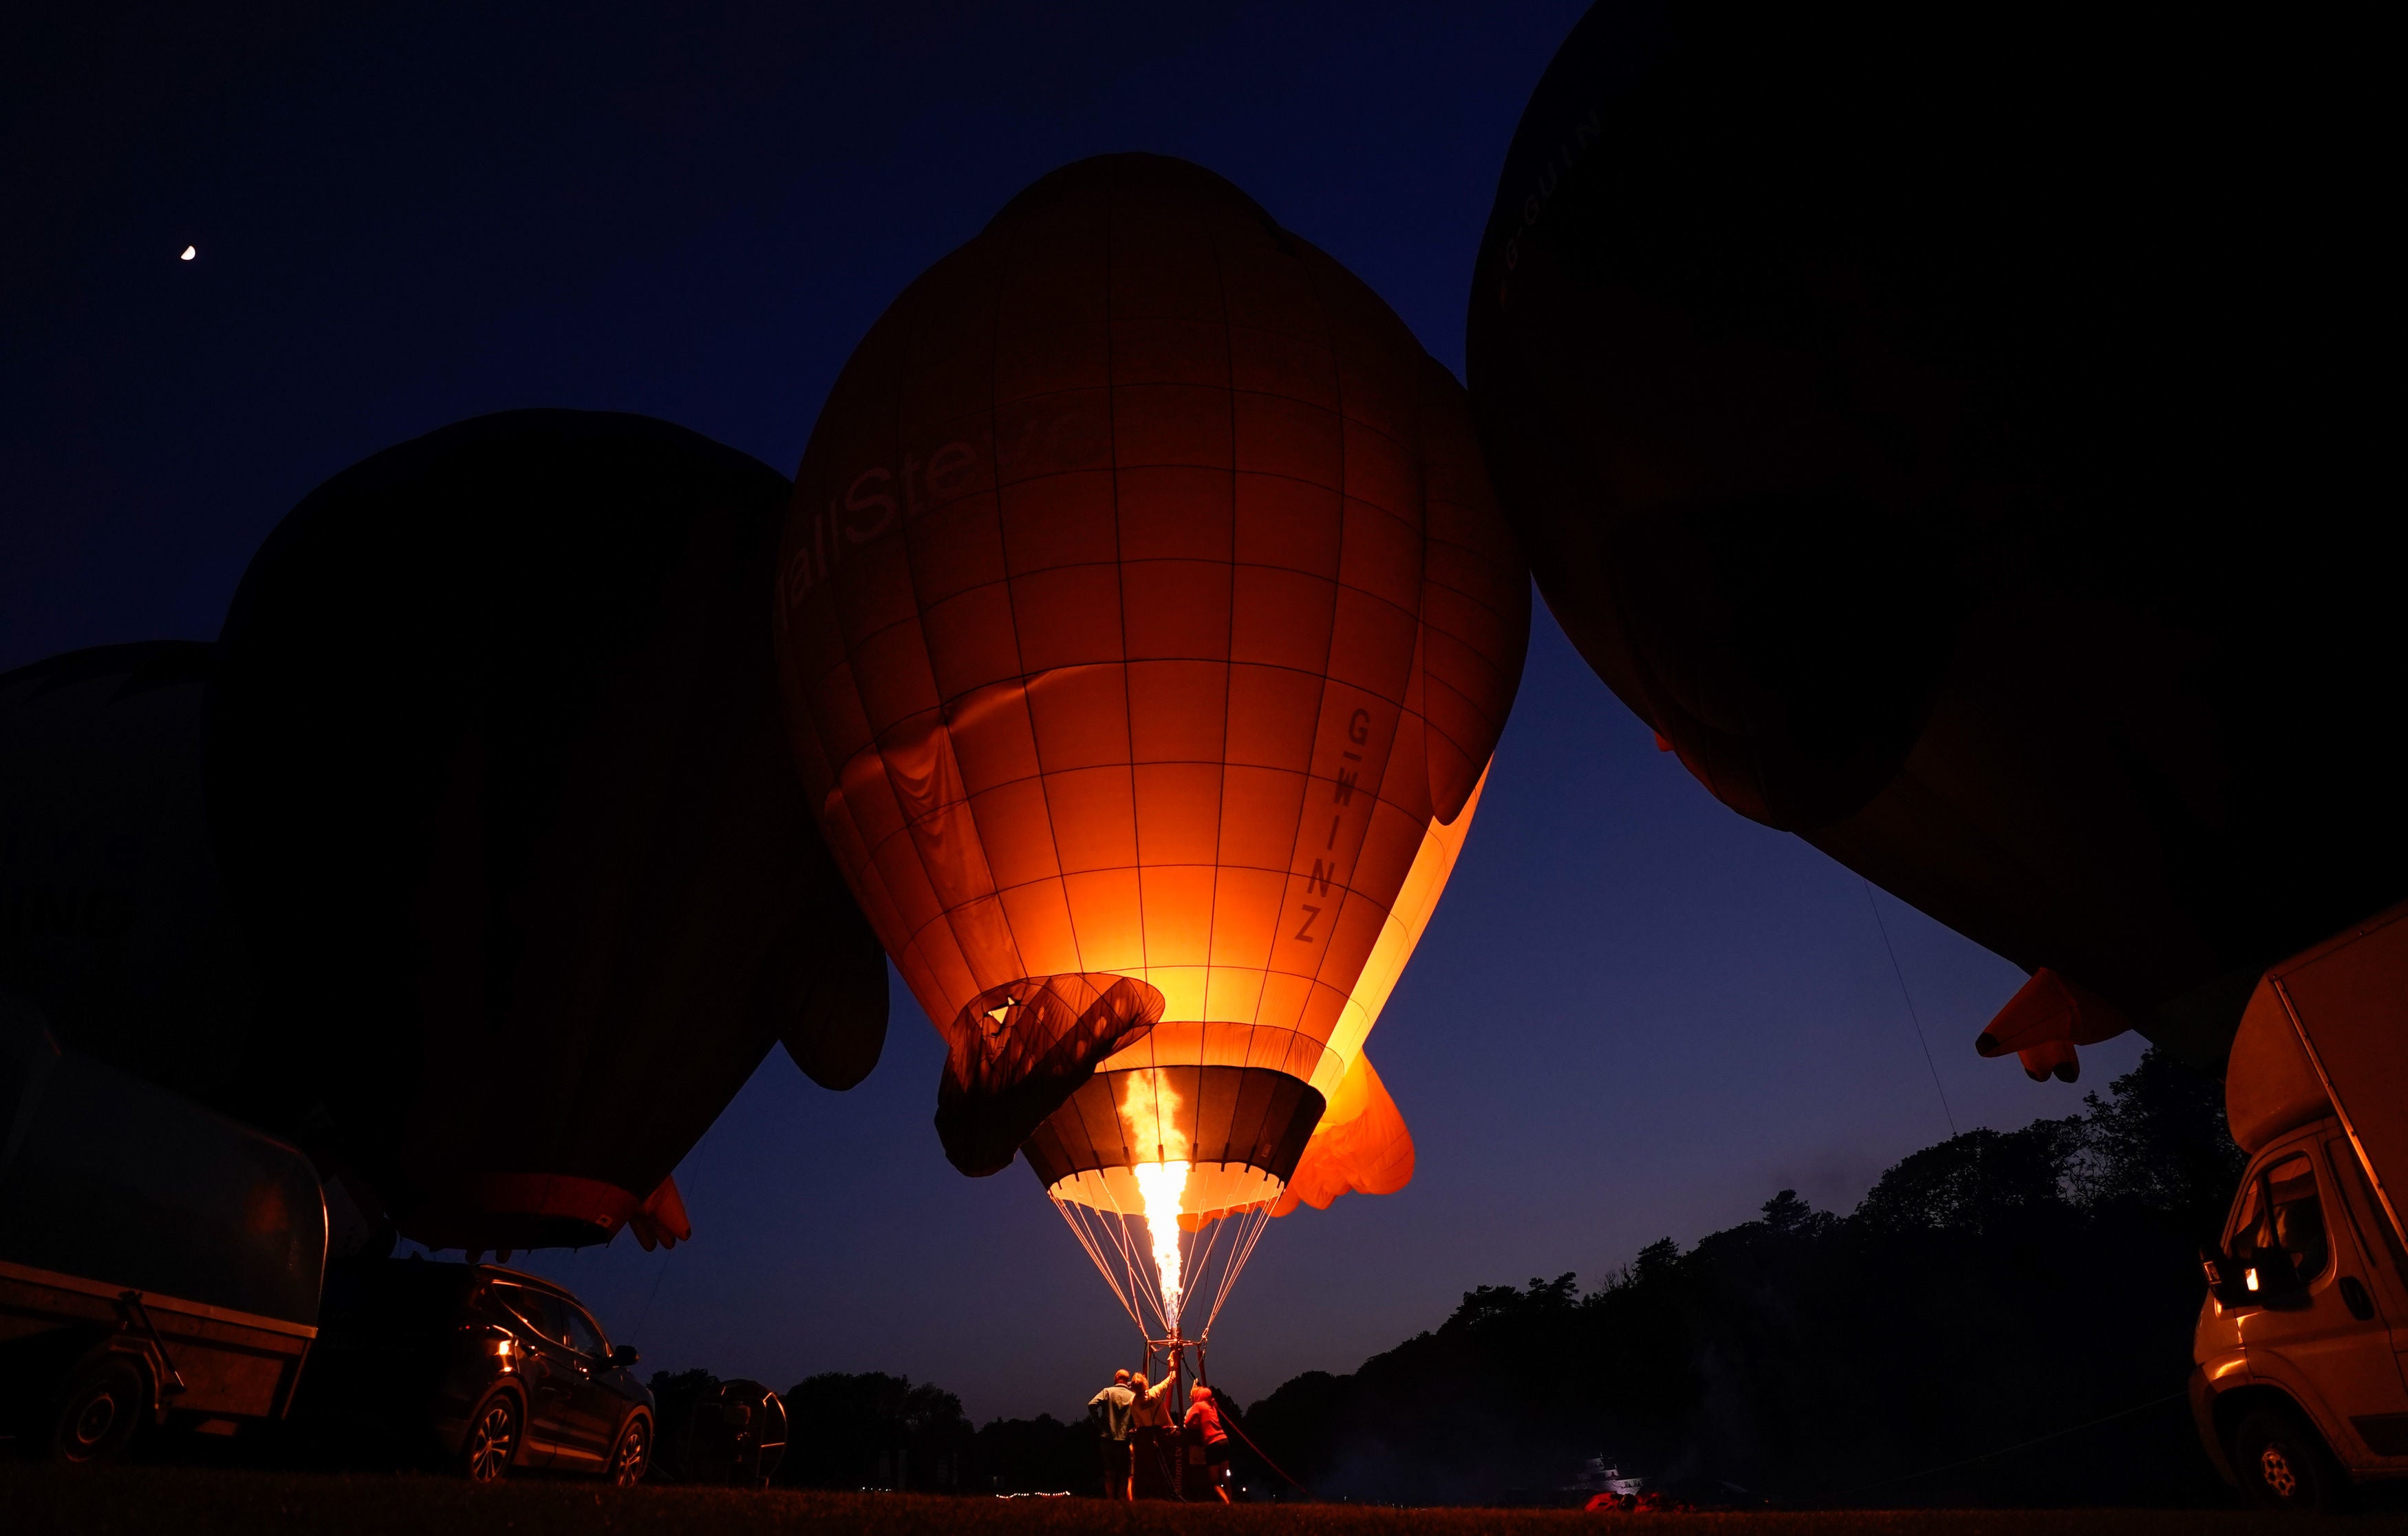 A hot air balloon crew prepare their balloon during the Isle of Wight Balloon Festival at Robin Hill Country Park, Isle of Wight in May